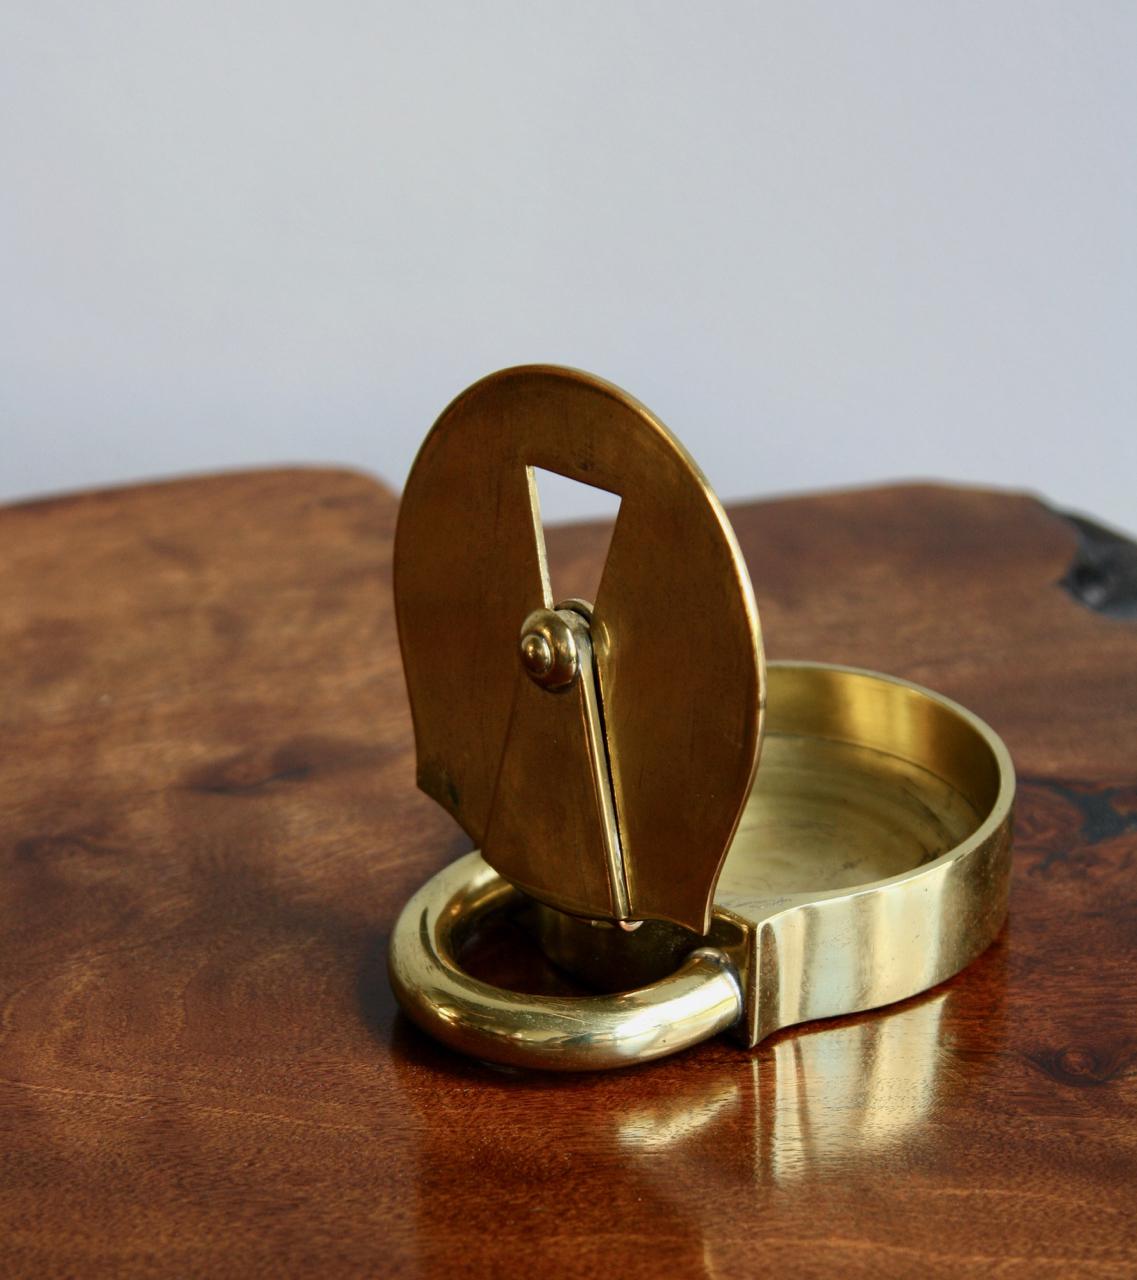 A rare model 3317 cast brass ashtray/trinket box in the form of a padlock designed by Carl Auböck II in 1935 and made by Werkstätte Carl Auböck between 1935 and 1940.
The escutcheon swings left and right to allow passage through to the space inside